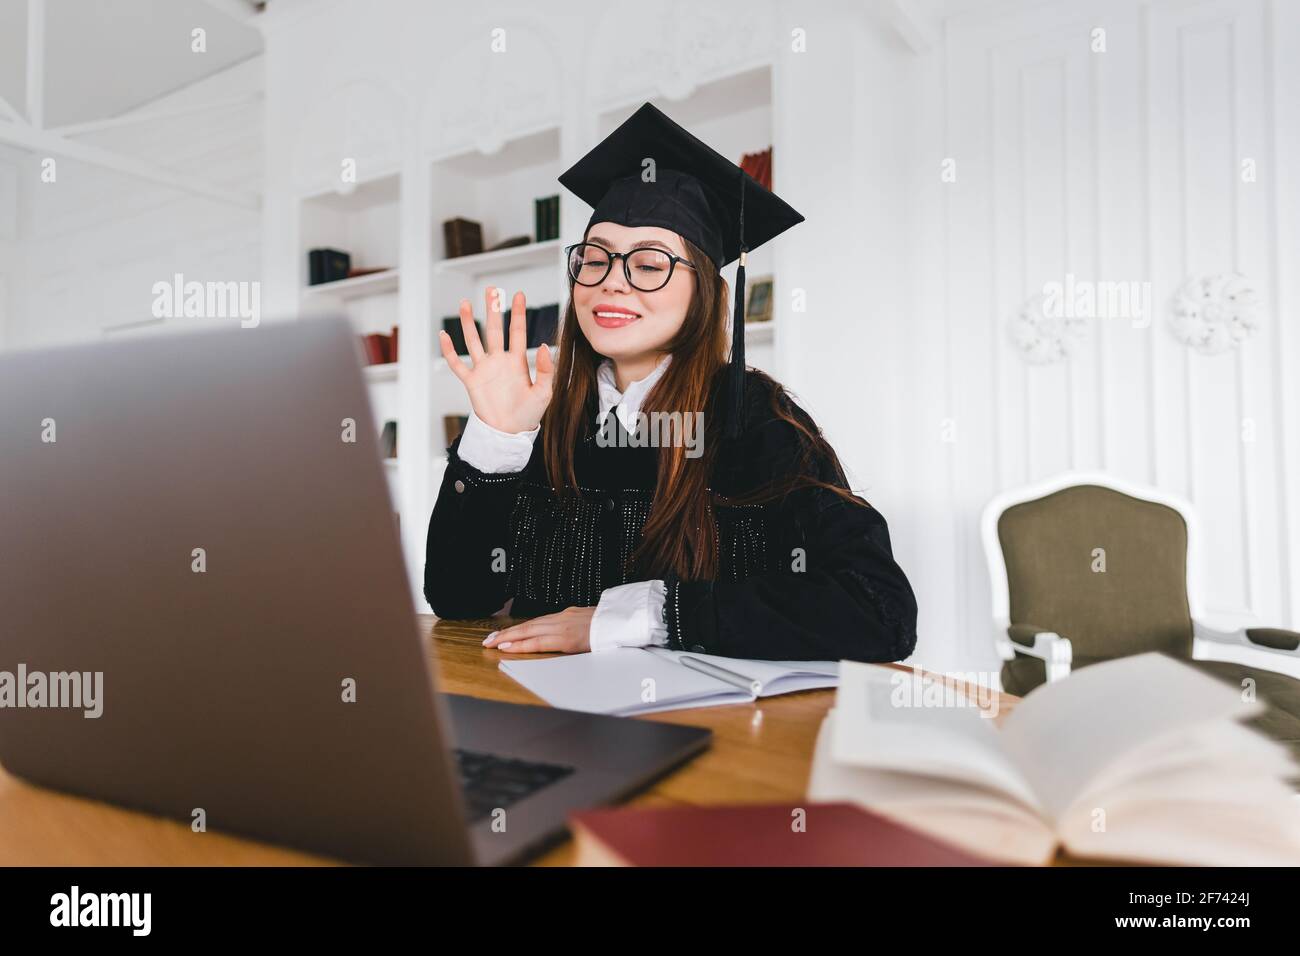 Happy young caucasian woman celebrating college graduation during a video call with friend or family. Online graduation ceremony concept Stock Photo